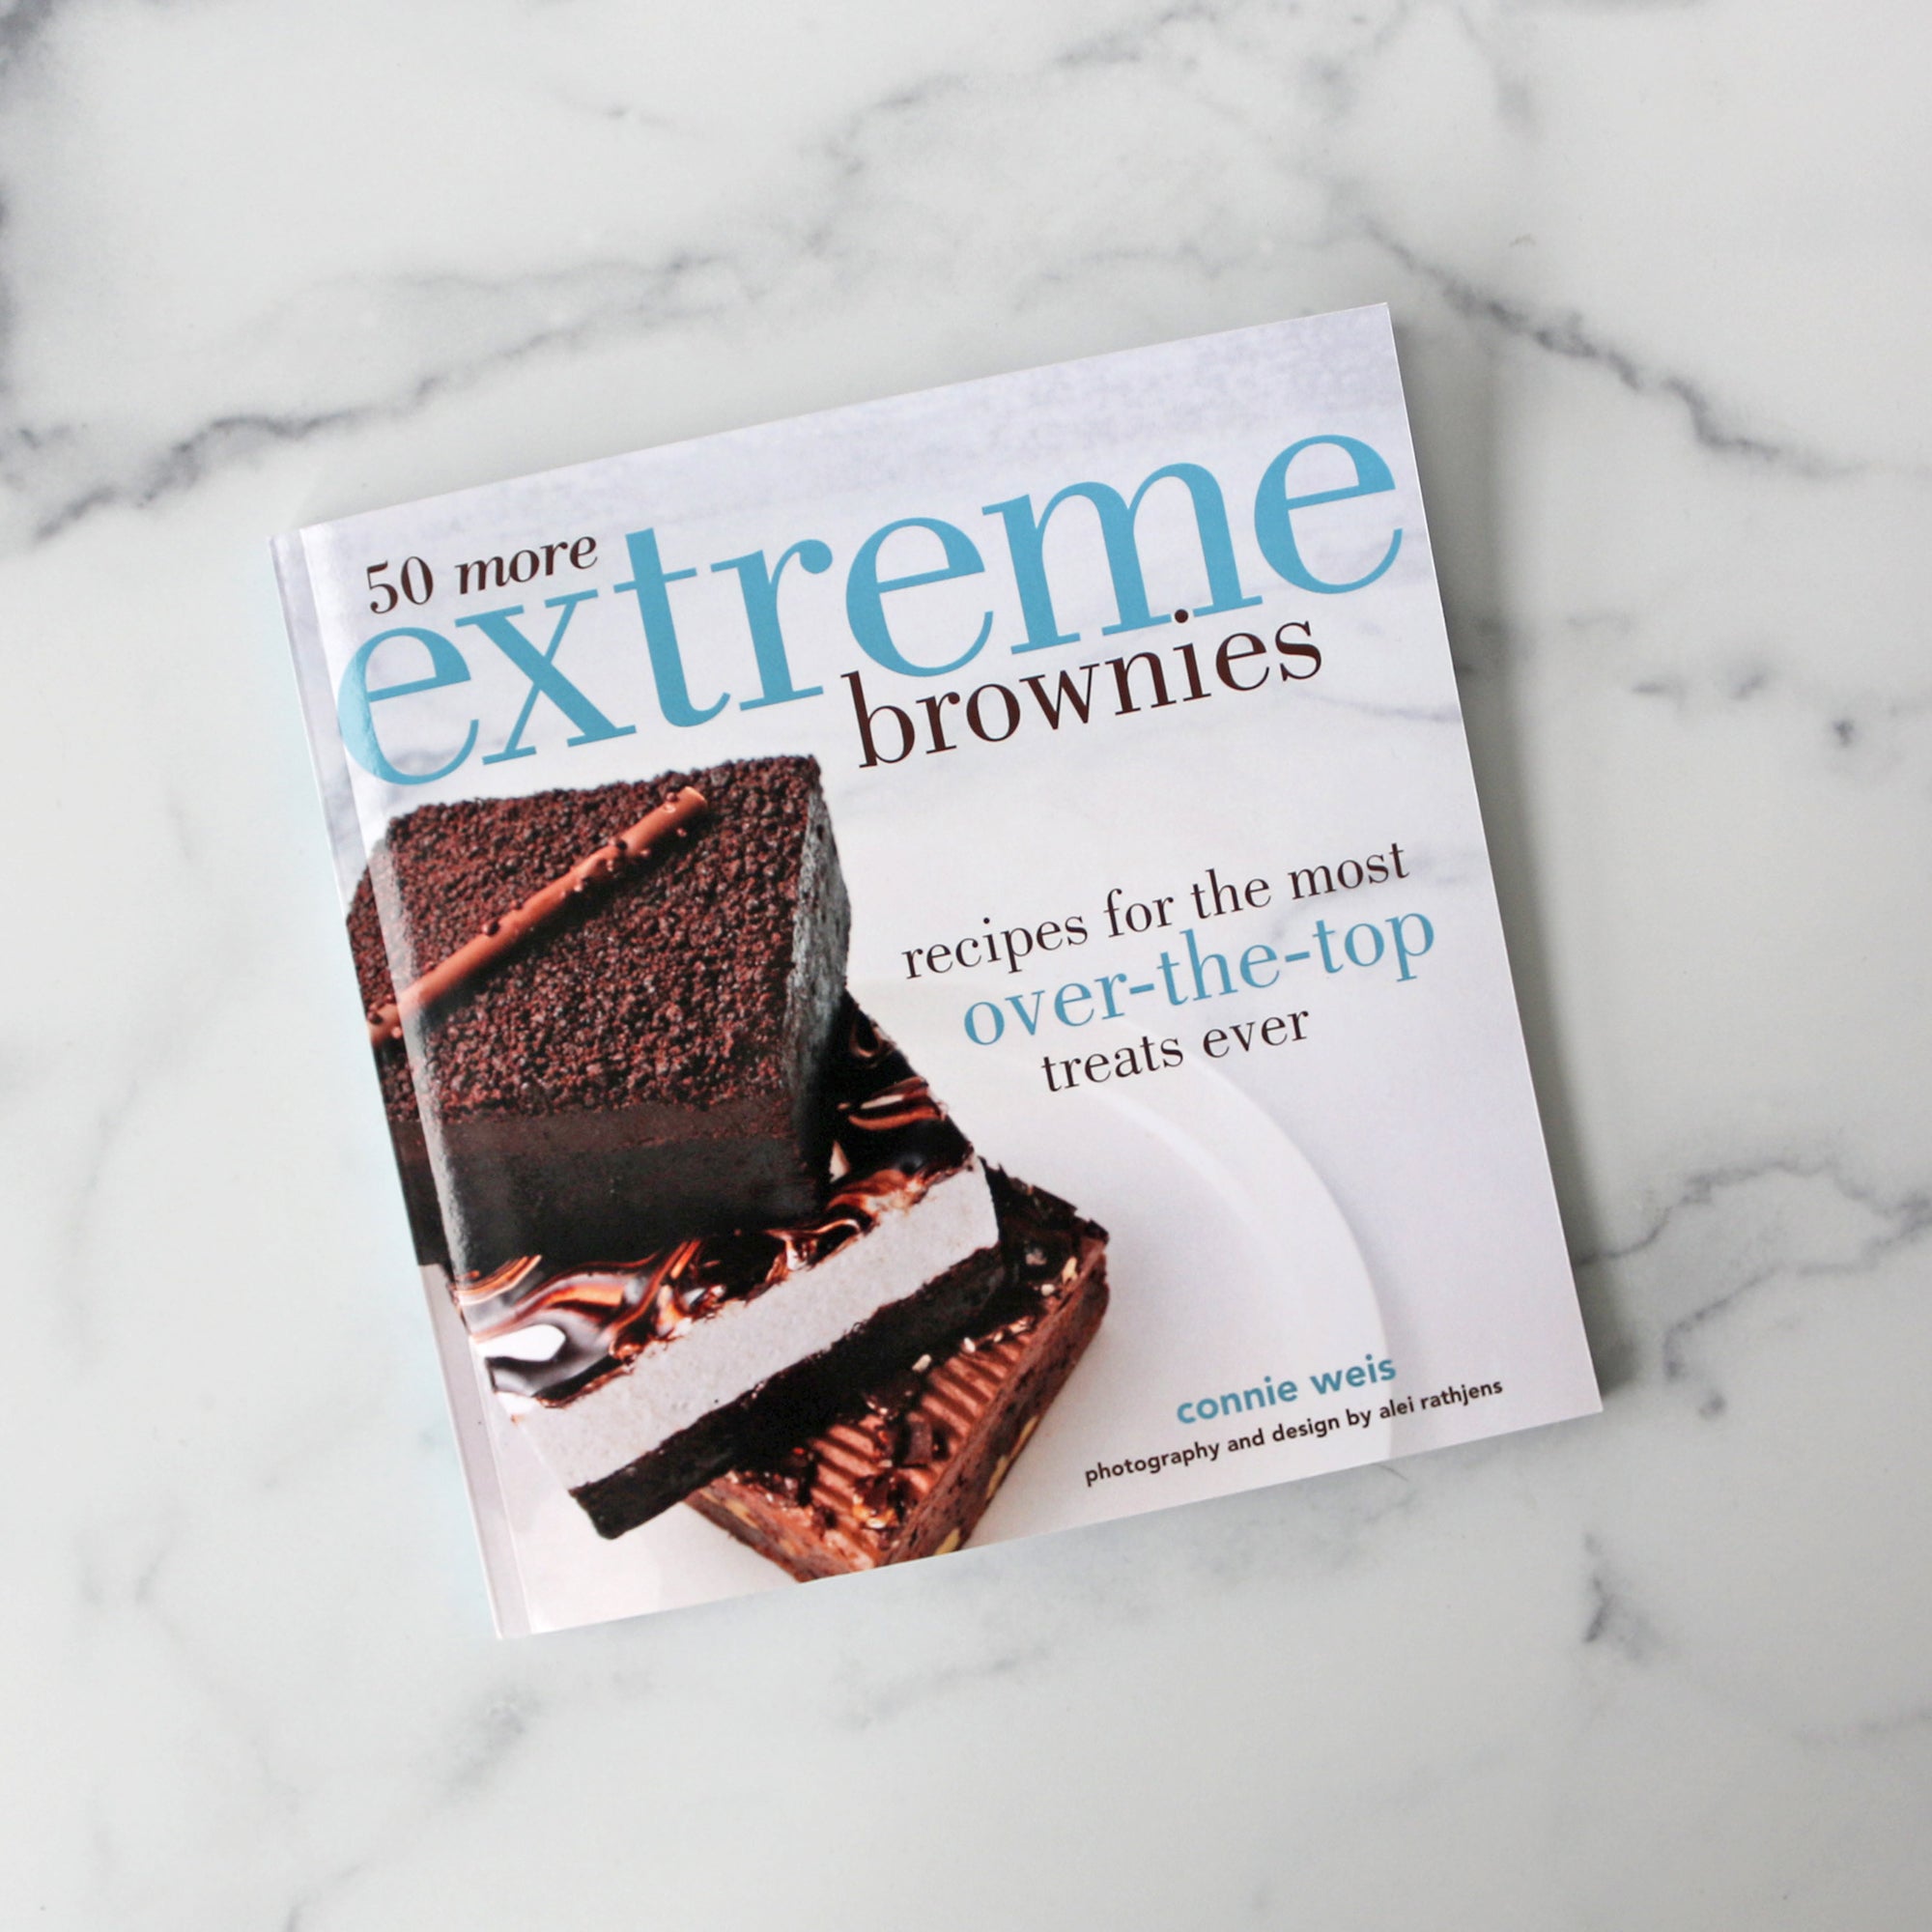 50 More Extreme Brownies: Recipes For The Most Over-The-Top Treats Ever